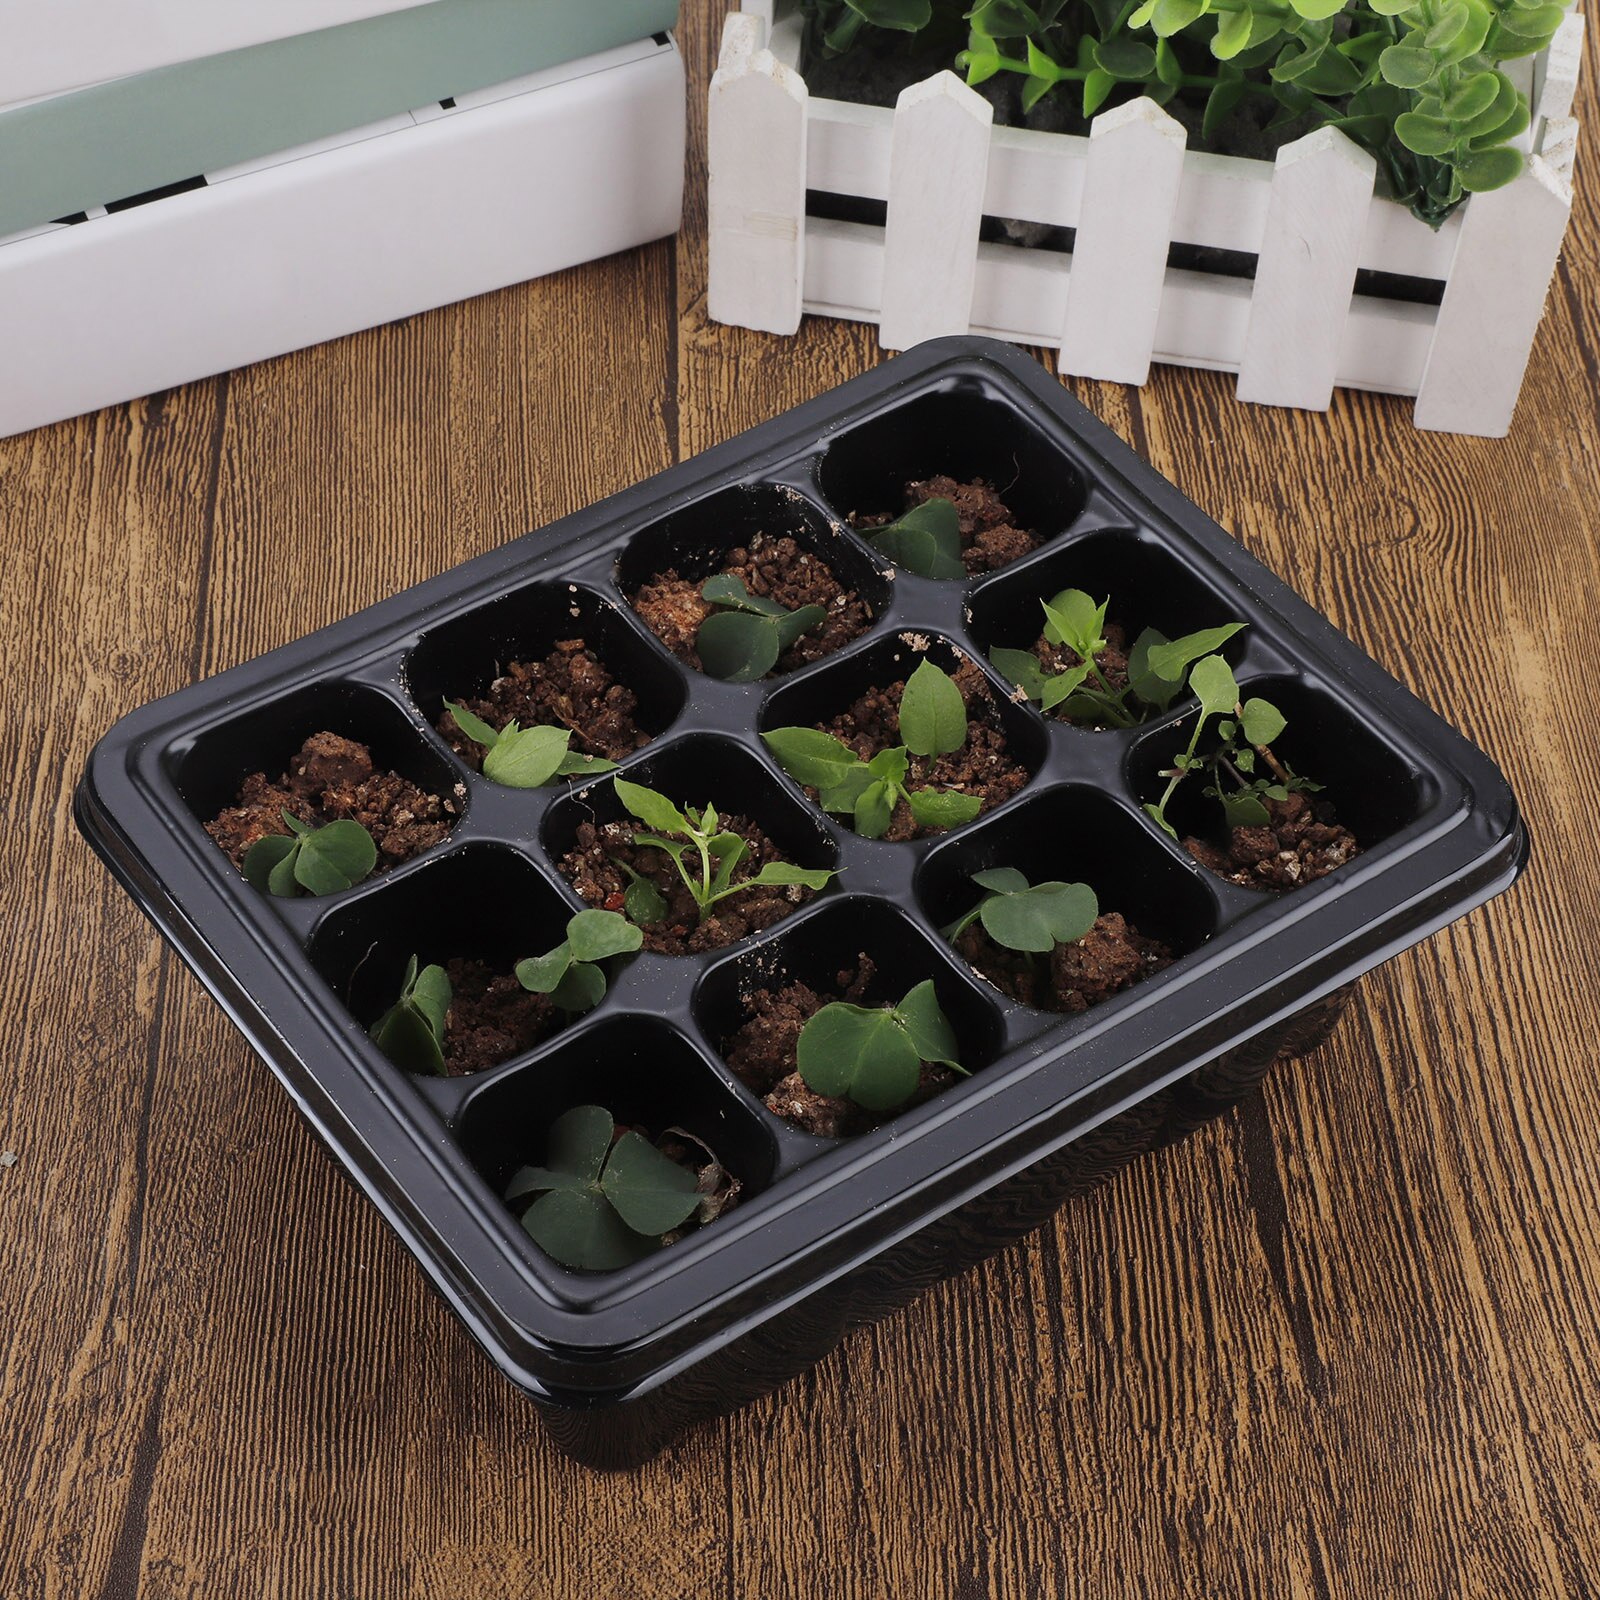 Seedling Box Seedling Propagation Kit Seedling Starter Tray Set Humidity Vented Domes Plant Lables 6 Cells Plant Growth Tray